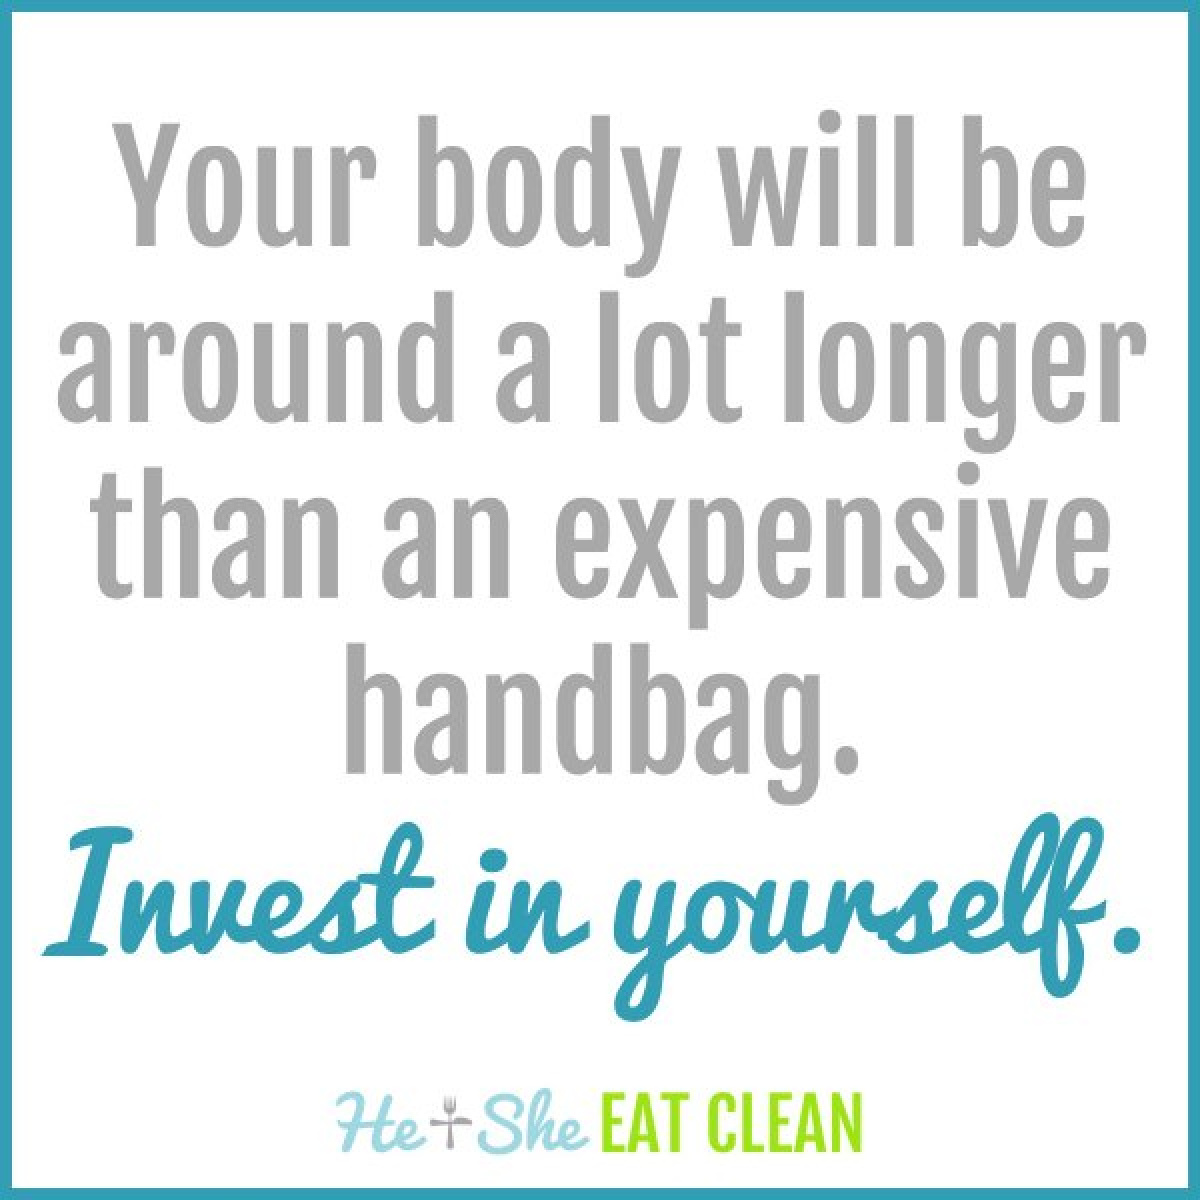 text reads Your body will be around a lot longer than an expensive handbag. Invest in yourself.